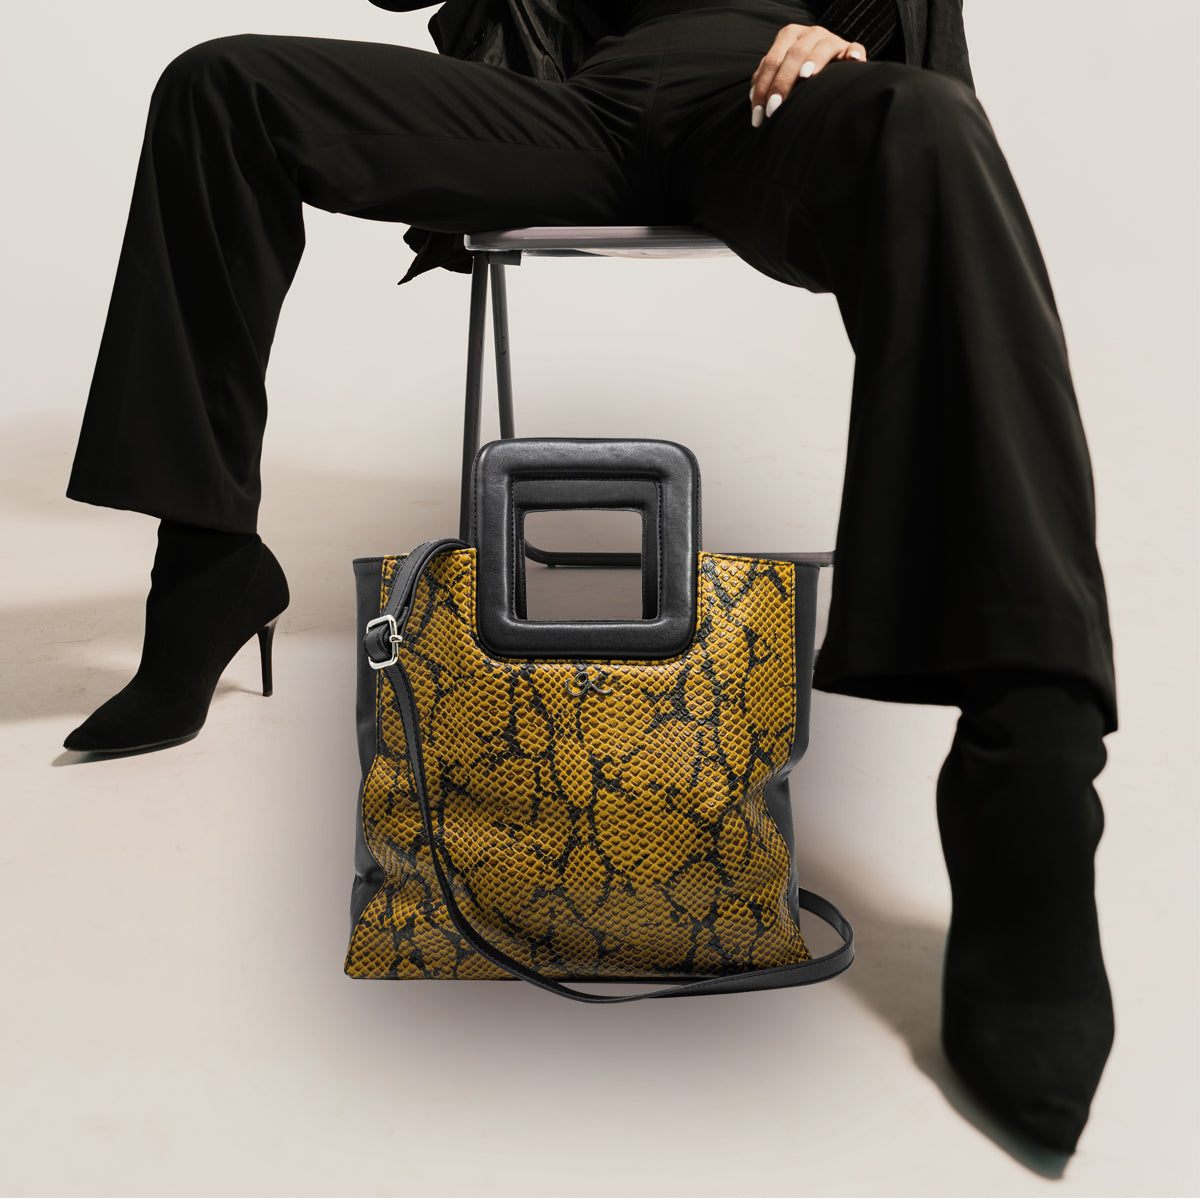 large black brown print leather print handbag with a square handle. Accessory for women in San Diego, CA.